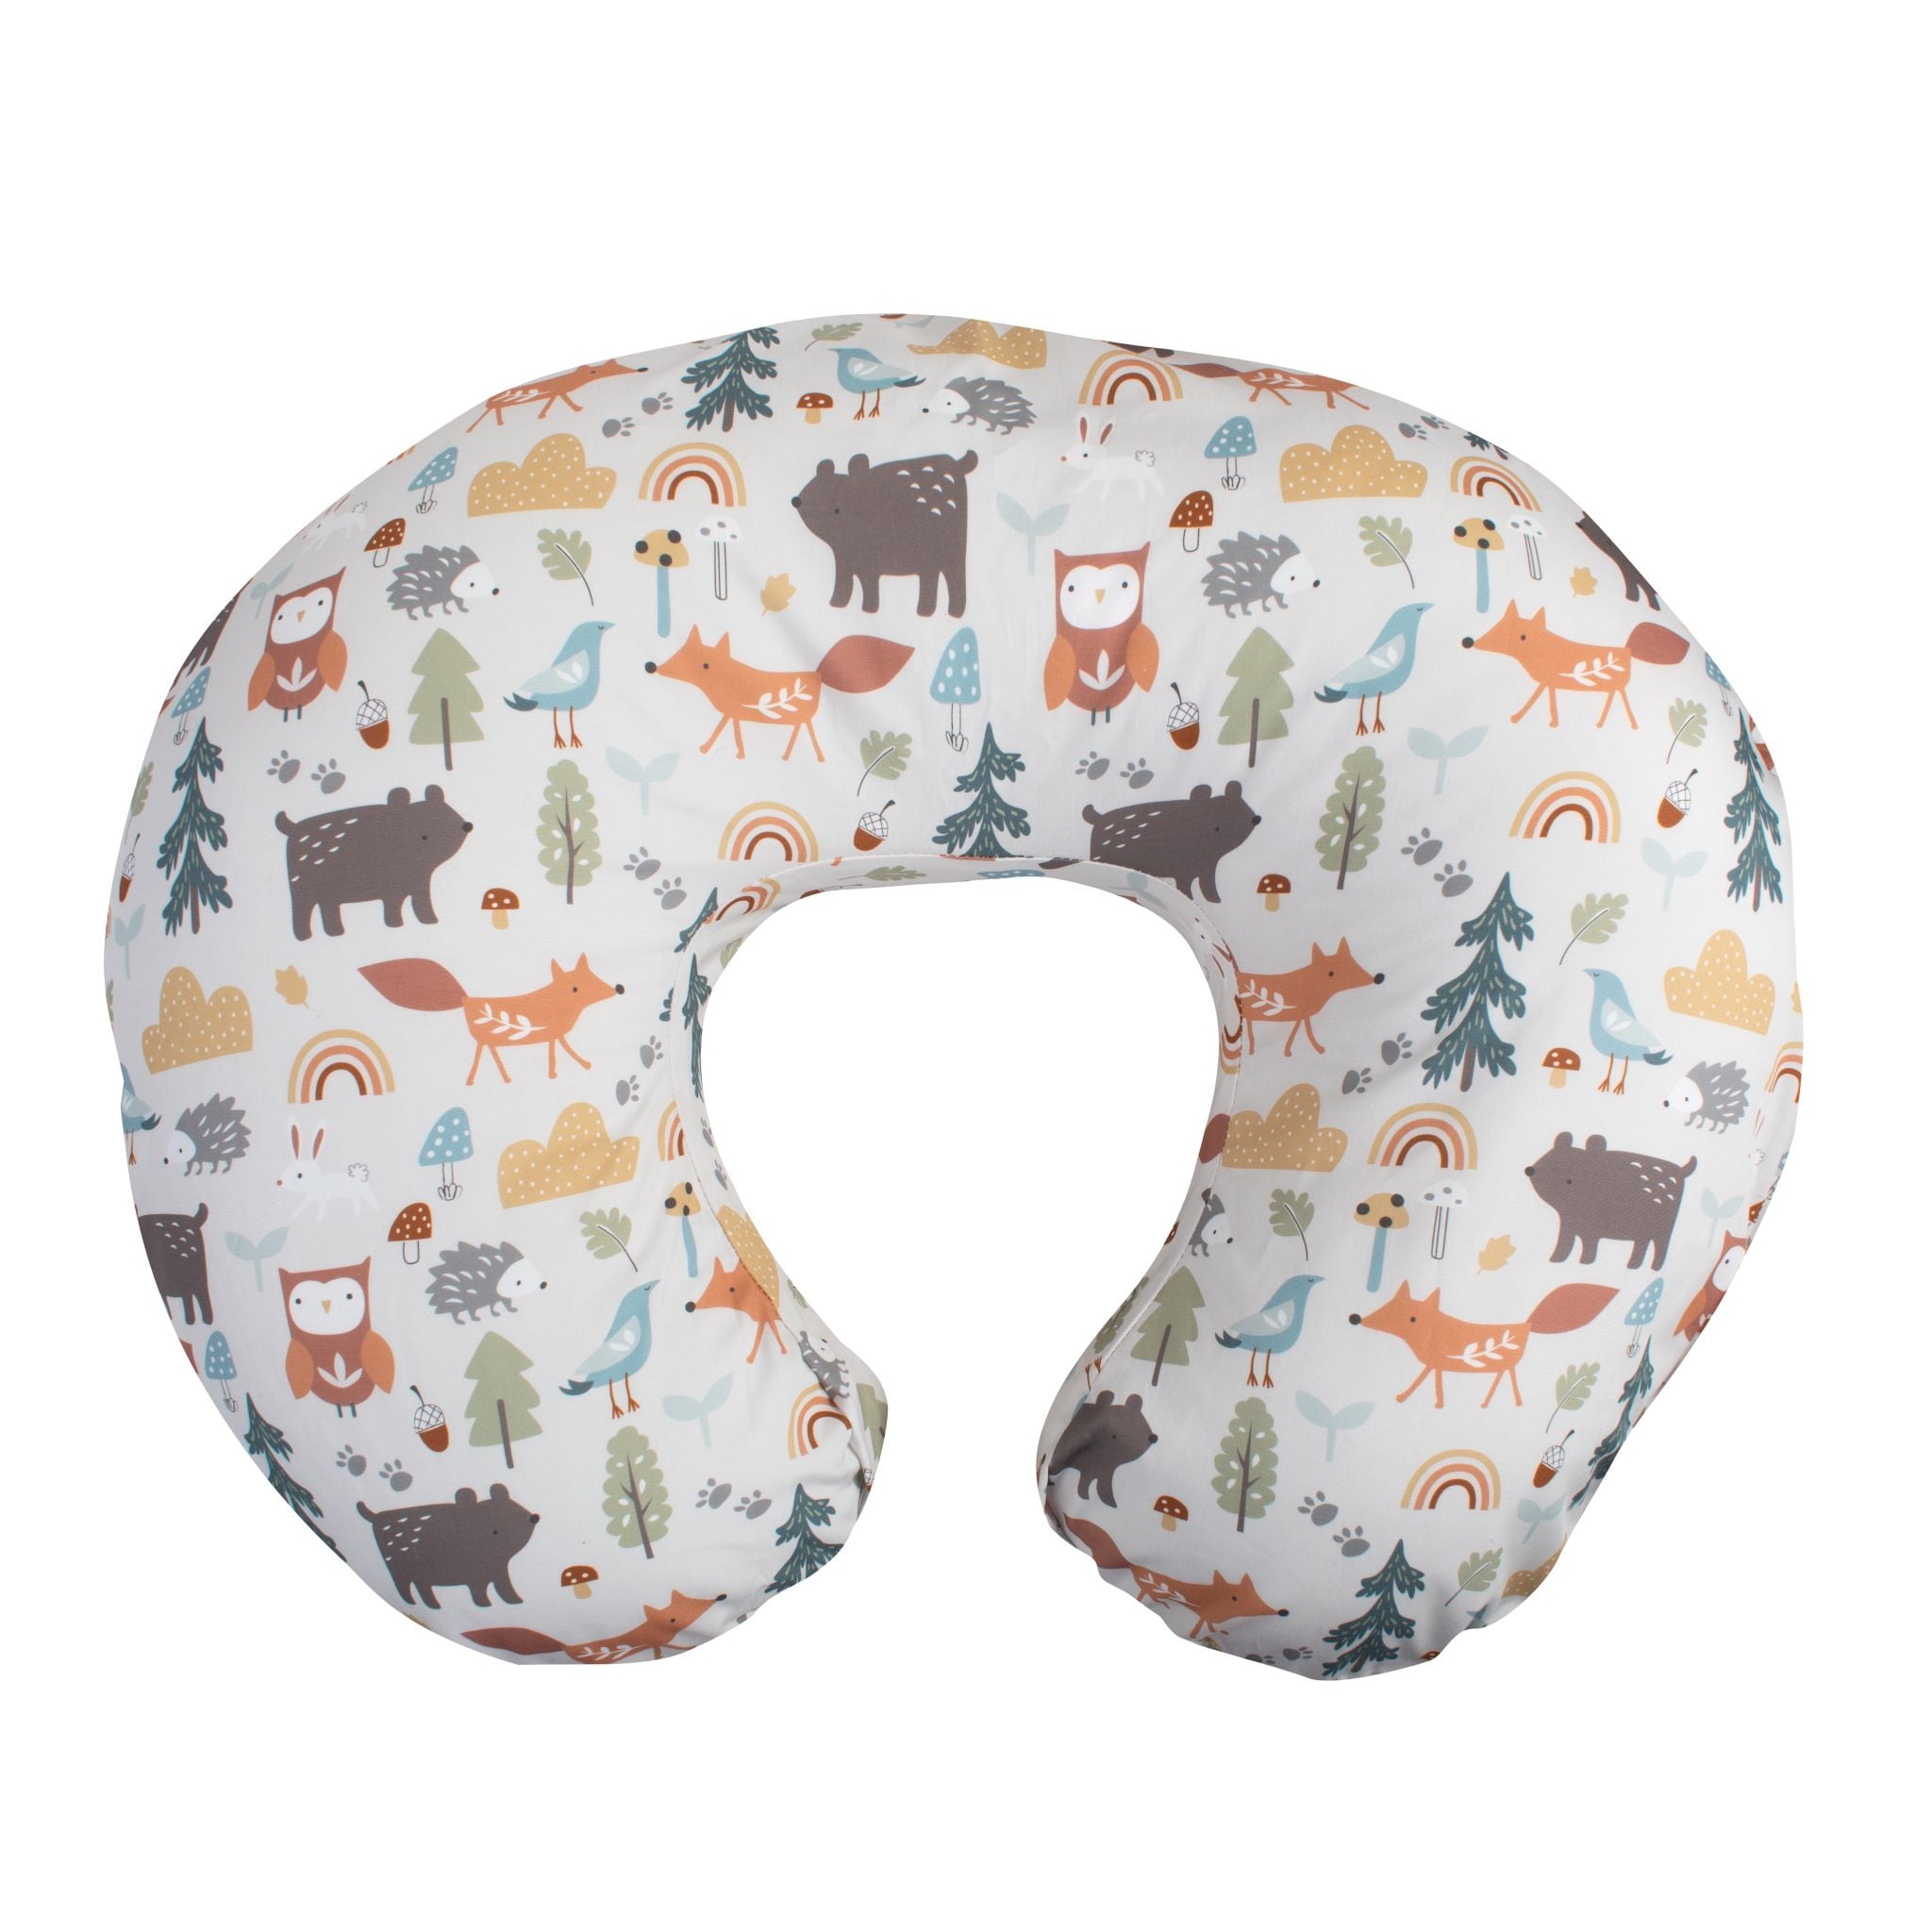 Slipcover for Pillow Baby Nursing Infant Feeding Support Classic Elephant Fabric 